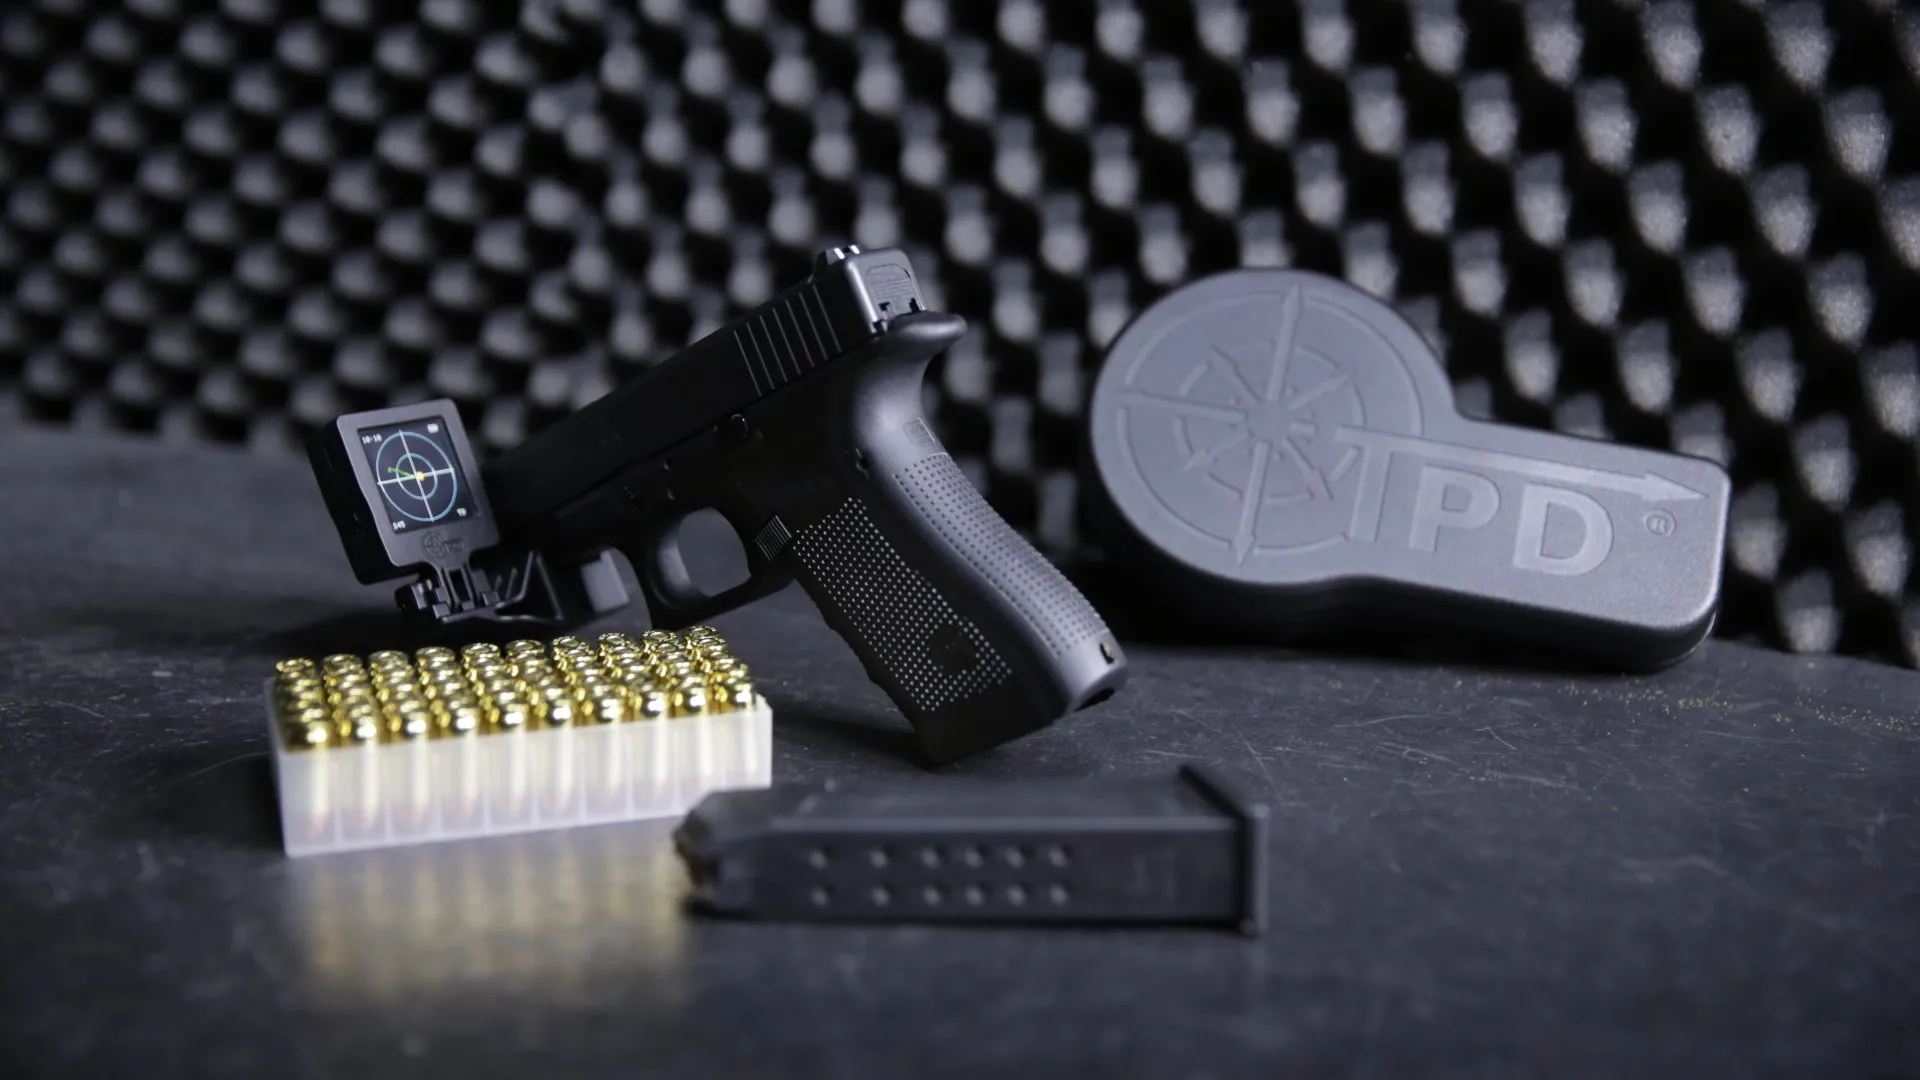 TPD-A1 on a Glock.